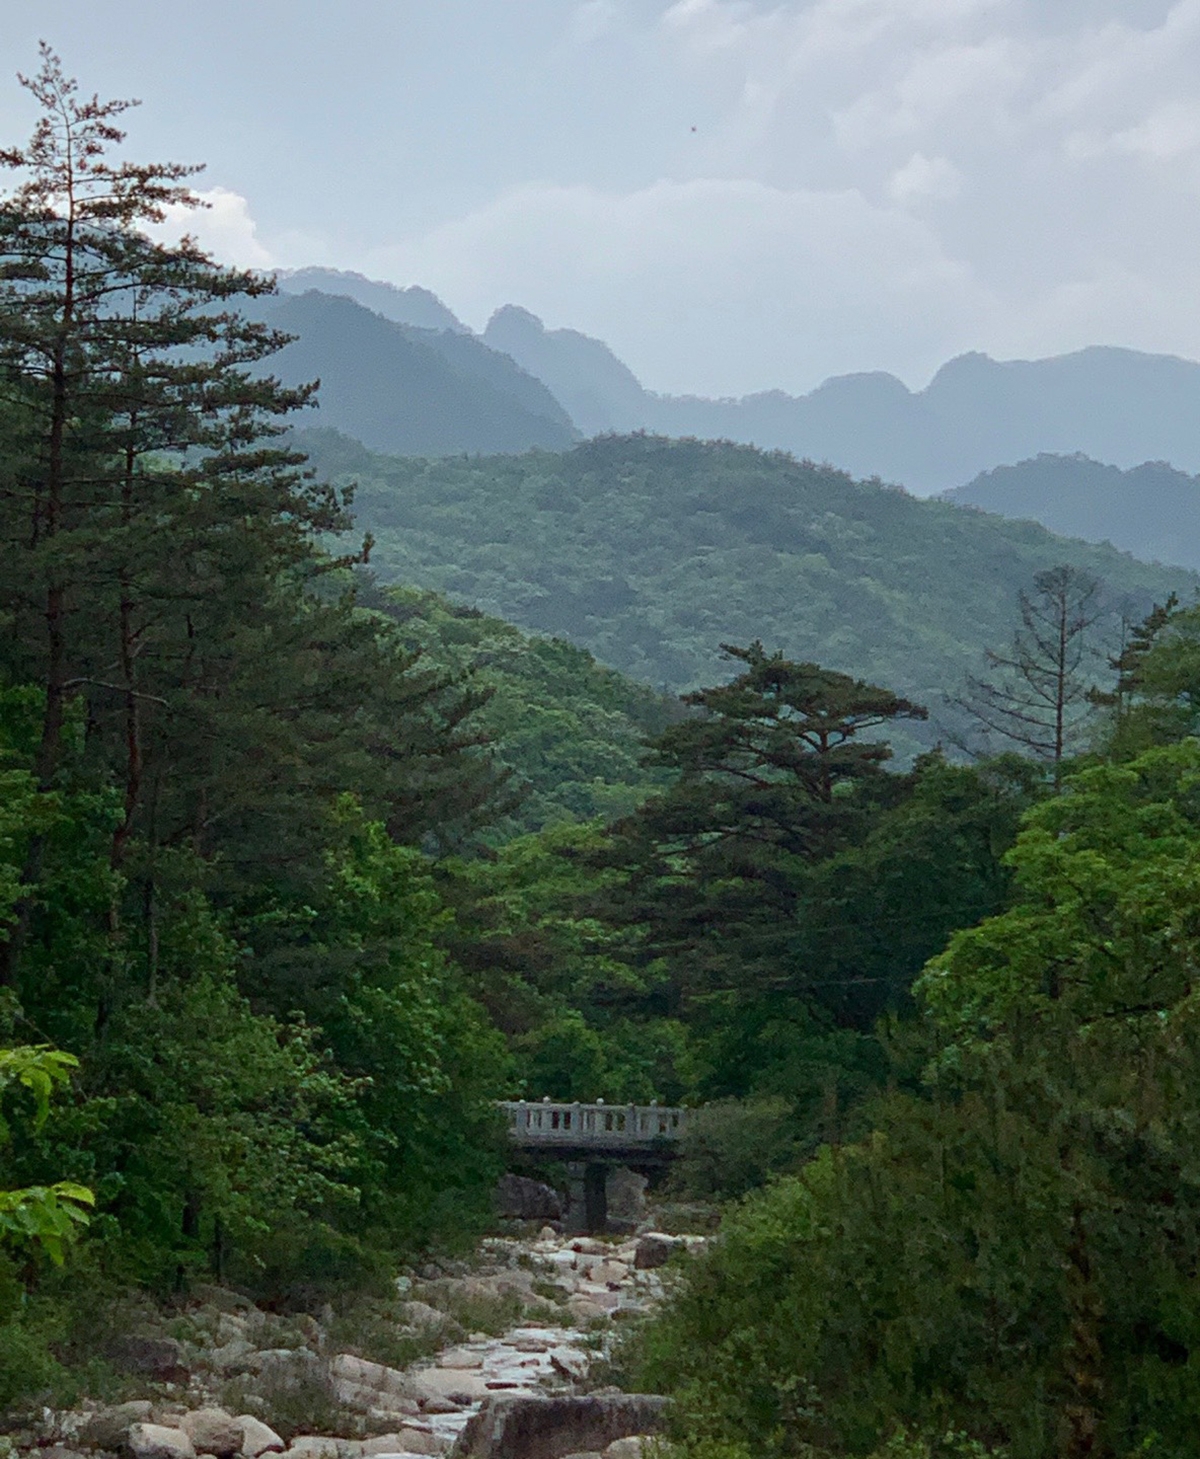 Photograph of Wolak National Park by Kimsooja